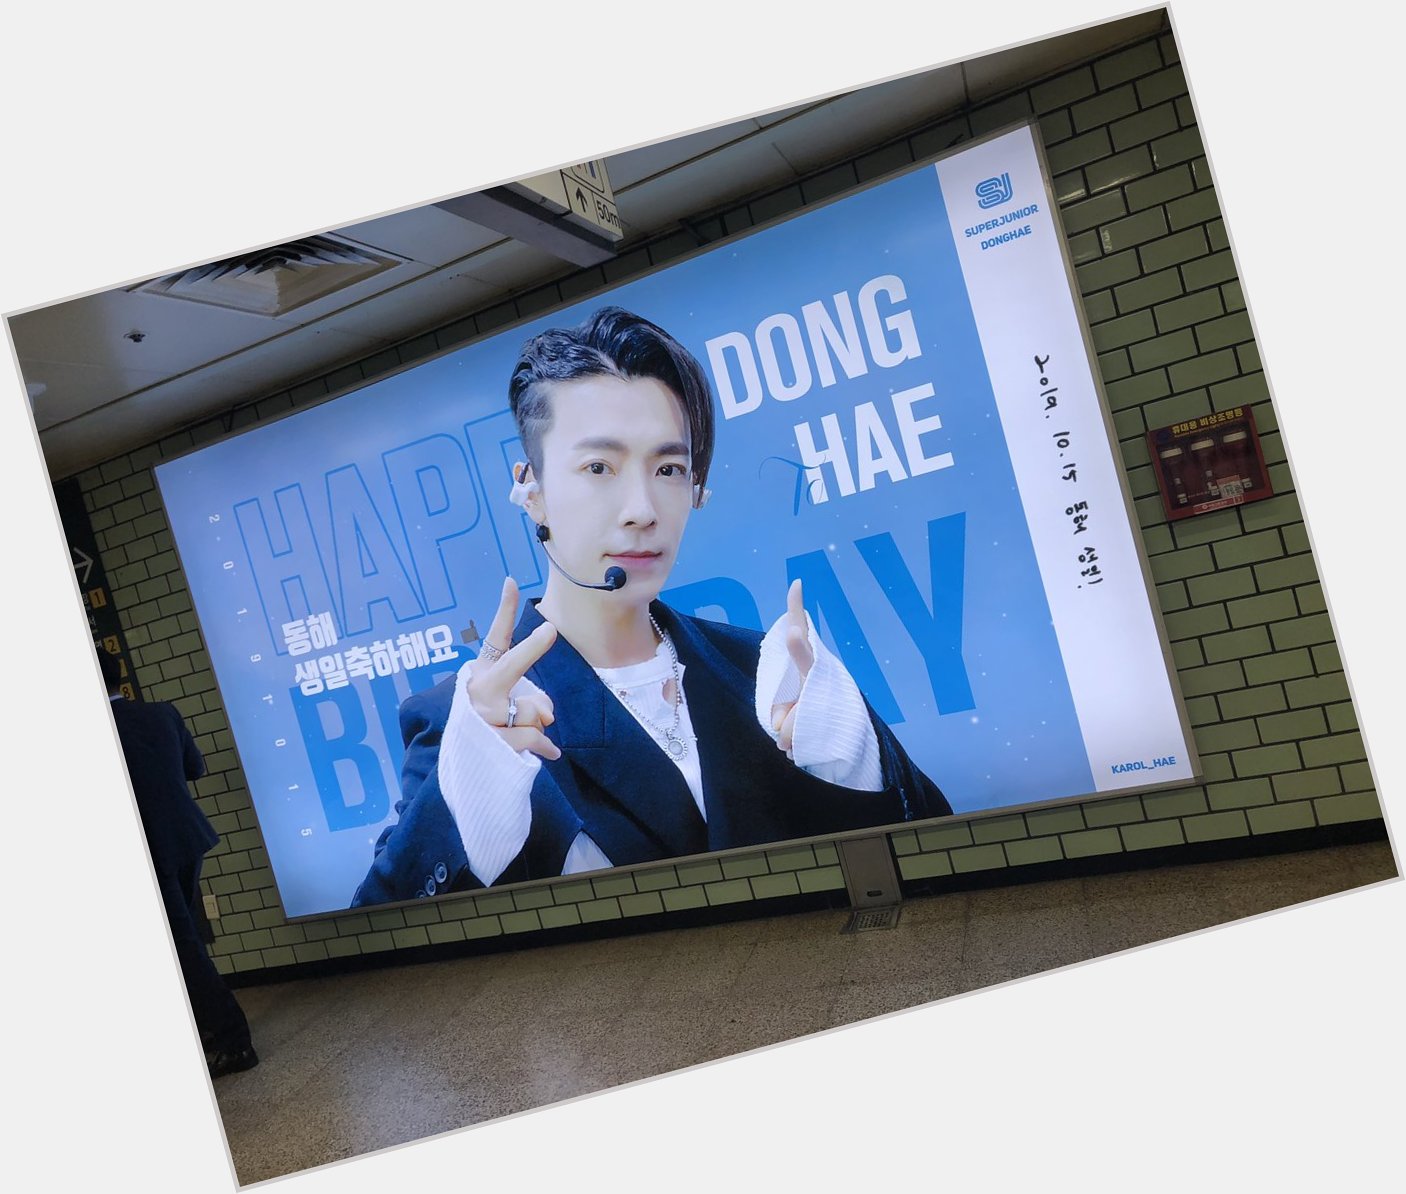 Happy (advance) birthday Lee Donghae! Found you at samseong station today!   